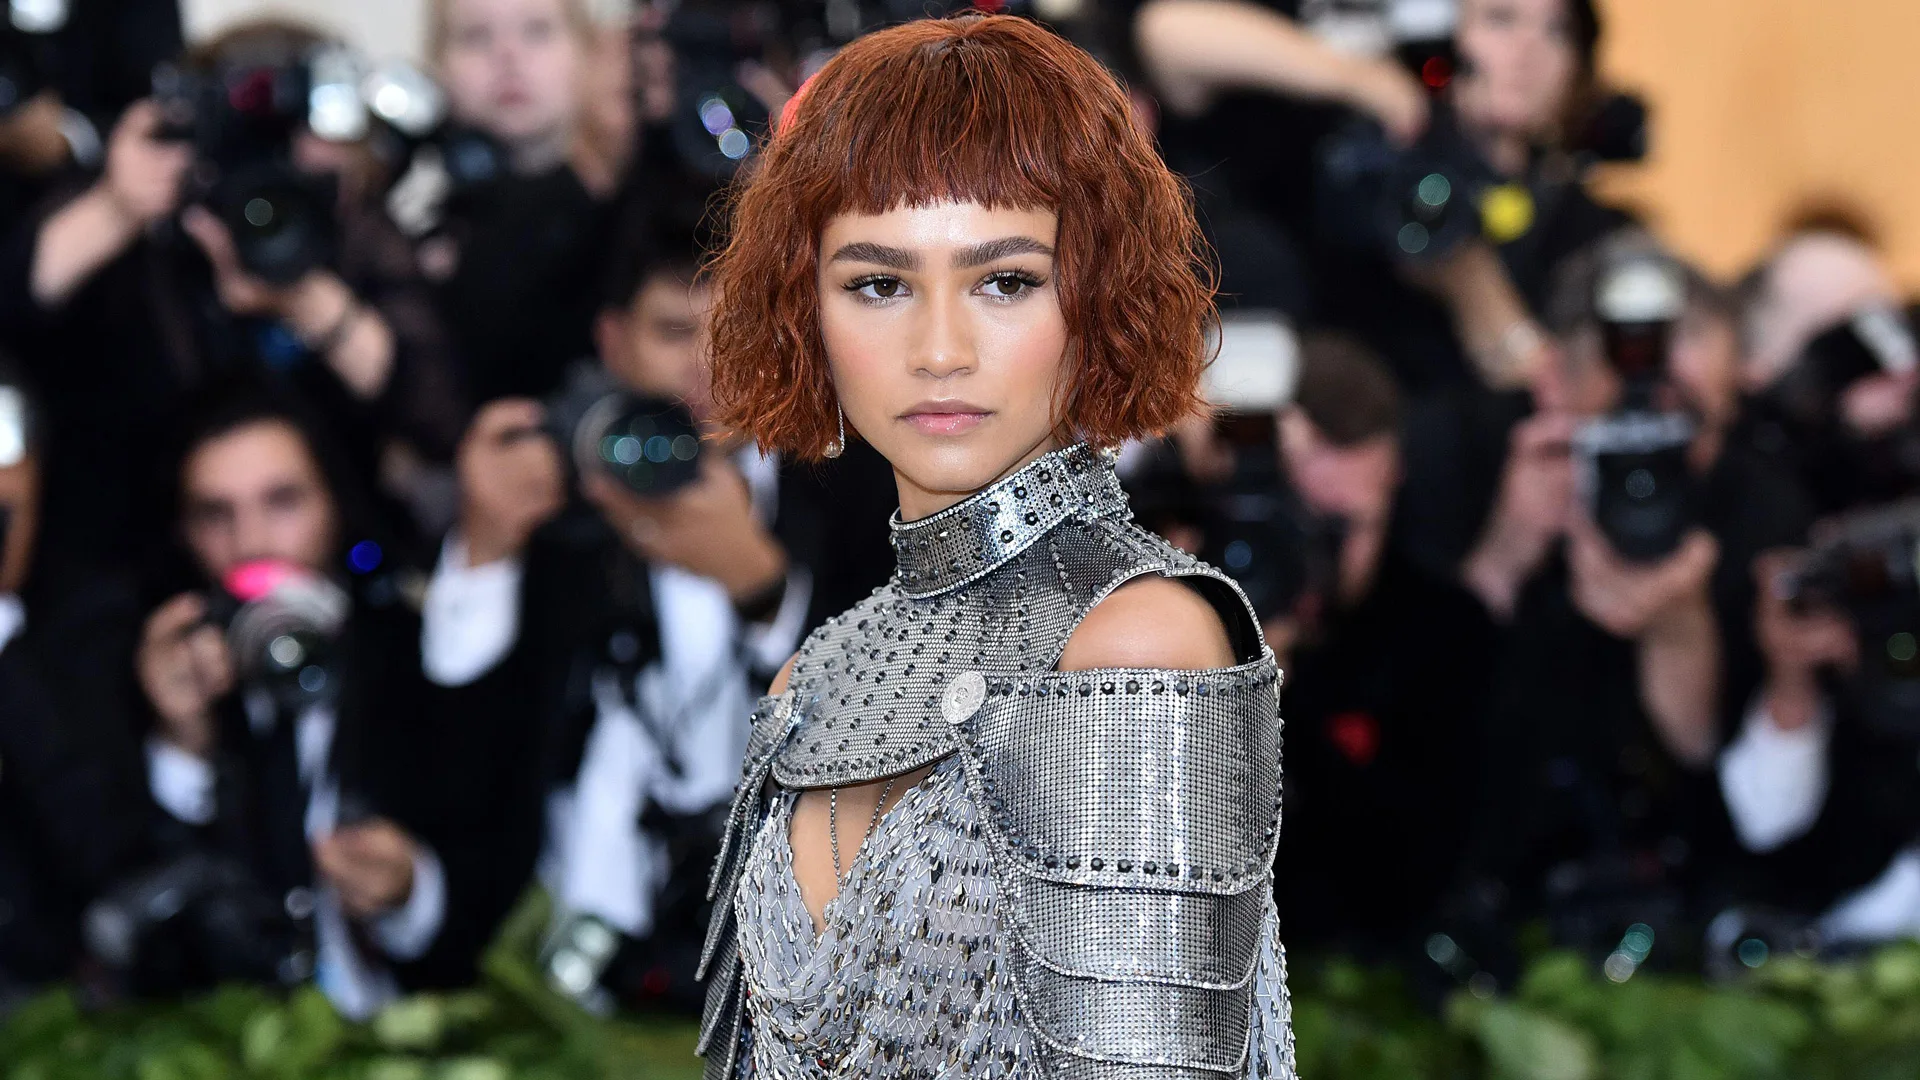 A photo of Zendaya in a suit of armour style outfit with an auburn wig - behind her is a crowd of press photographers